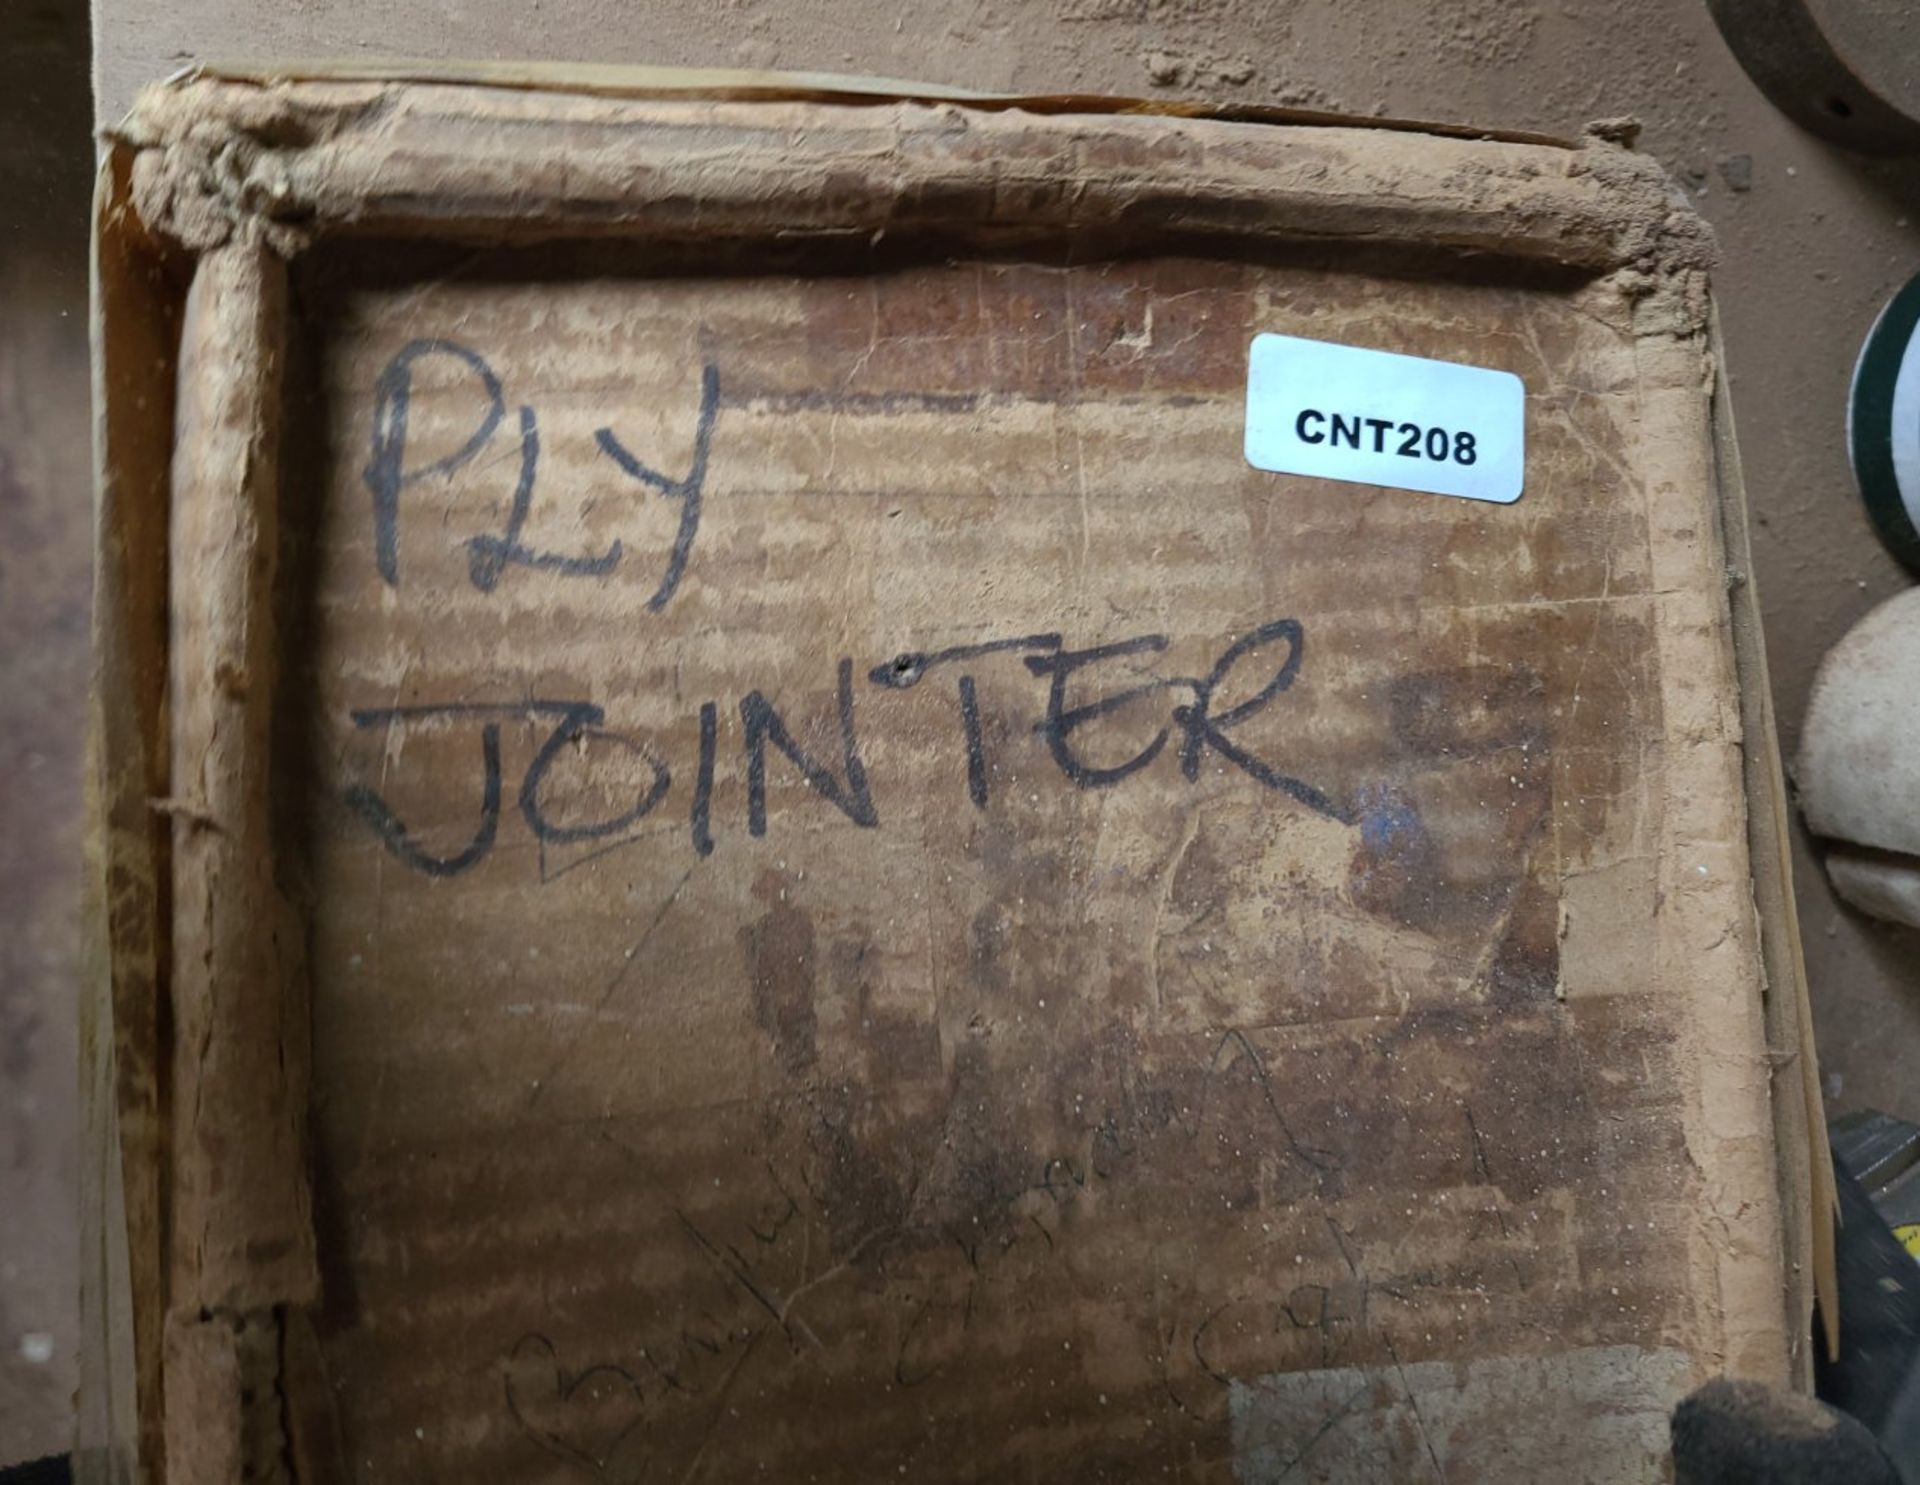 1 x Ply Jointer (Plywood 1 1/2" Planker) - Ref: CNT208 - CL846 - Location: Oxford - Image 7 of 7